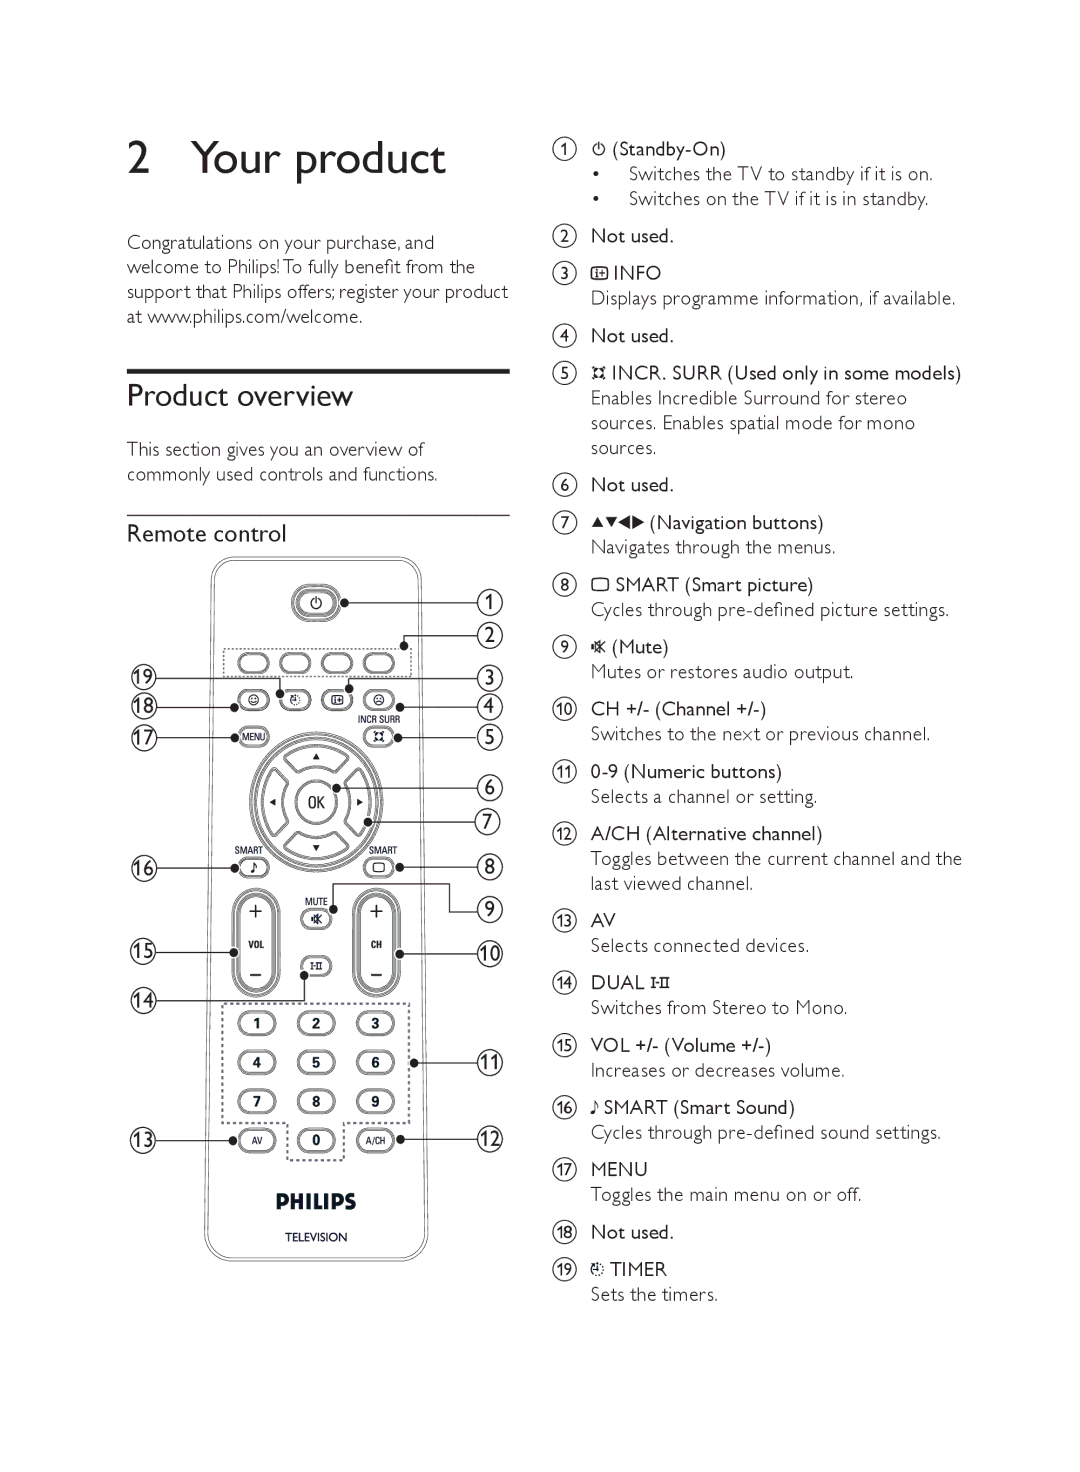 Philips 21PT4429/94, 21PT4439/94 user manual Your product, Product overview, Remote control 